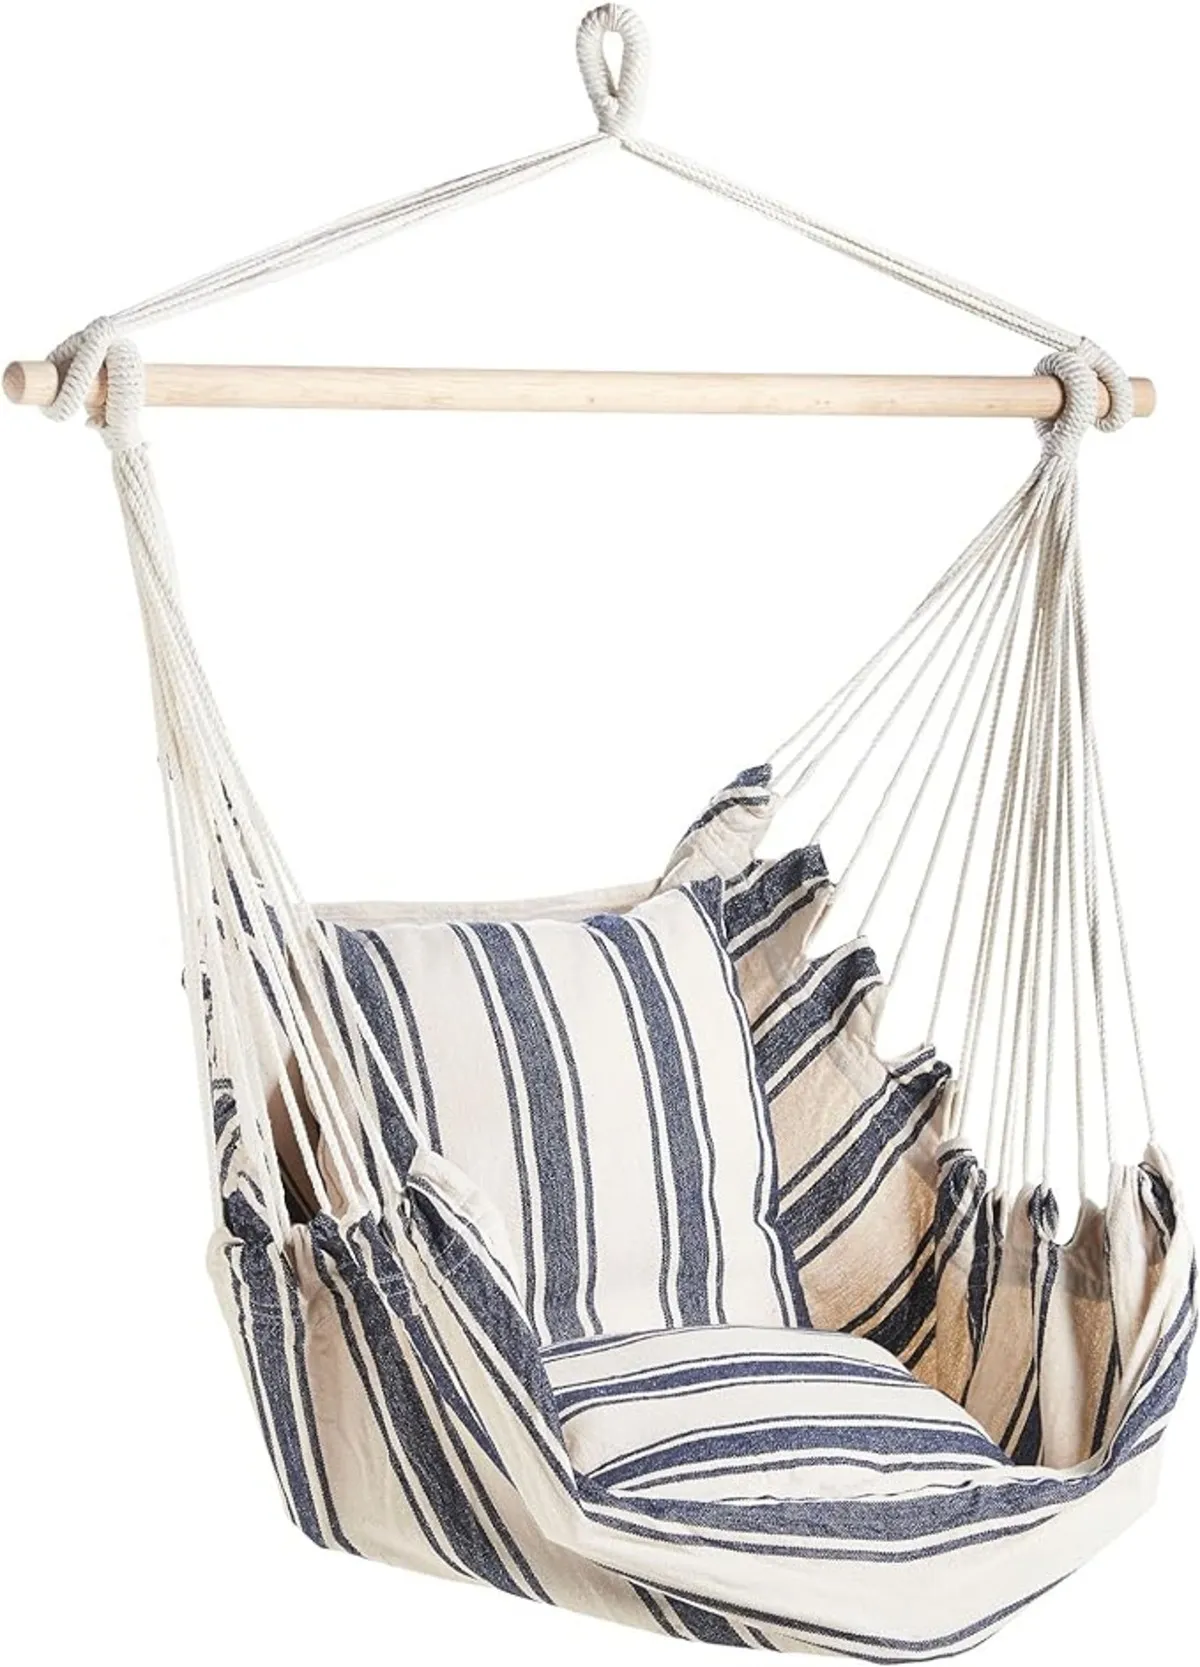 Blue and white striped upholstered hanging seat